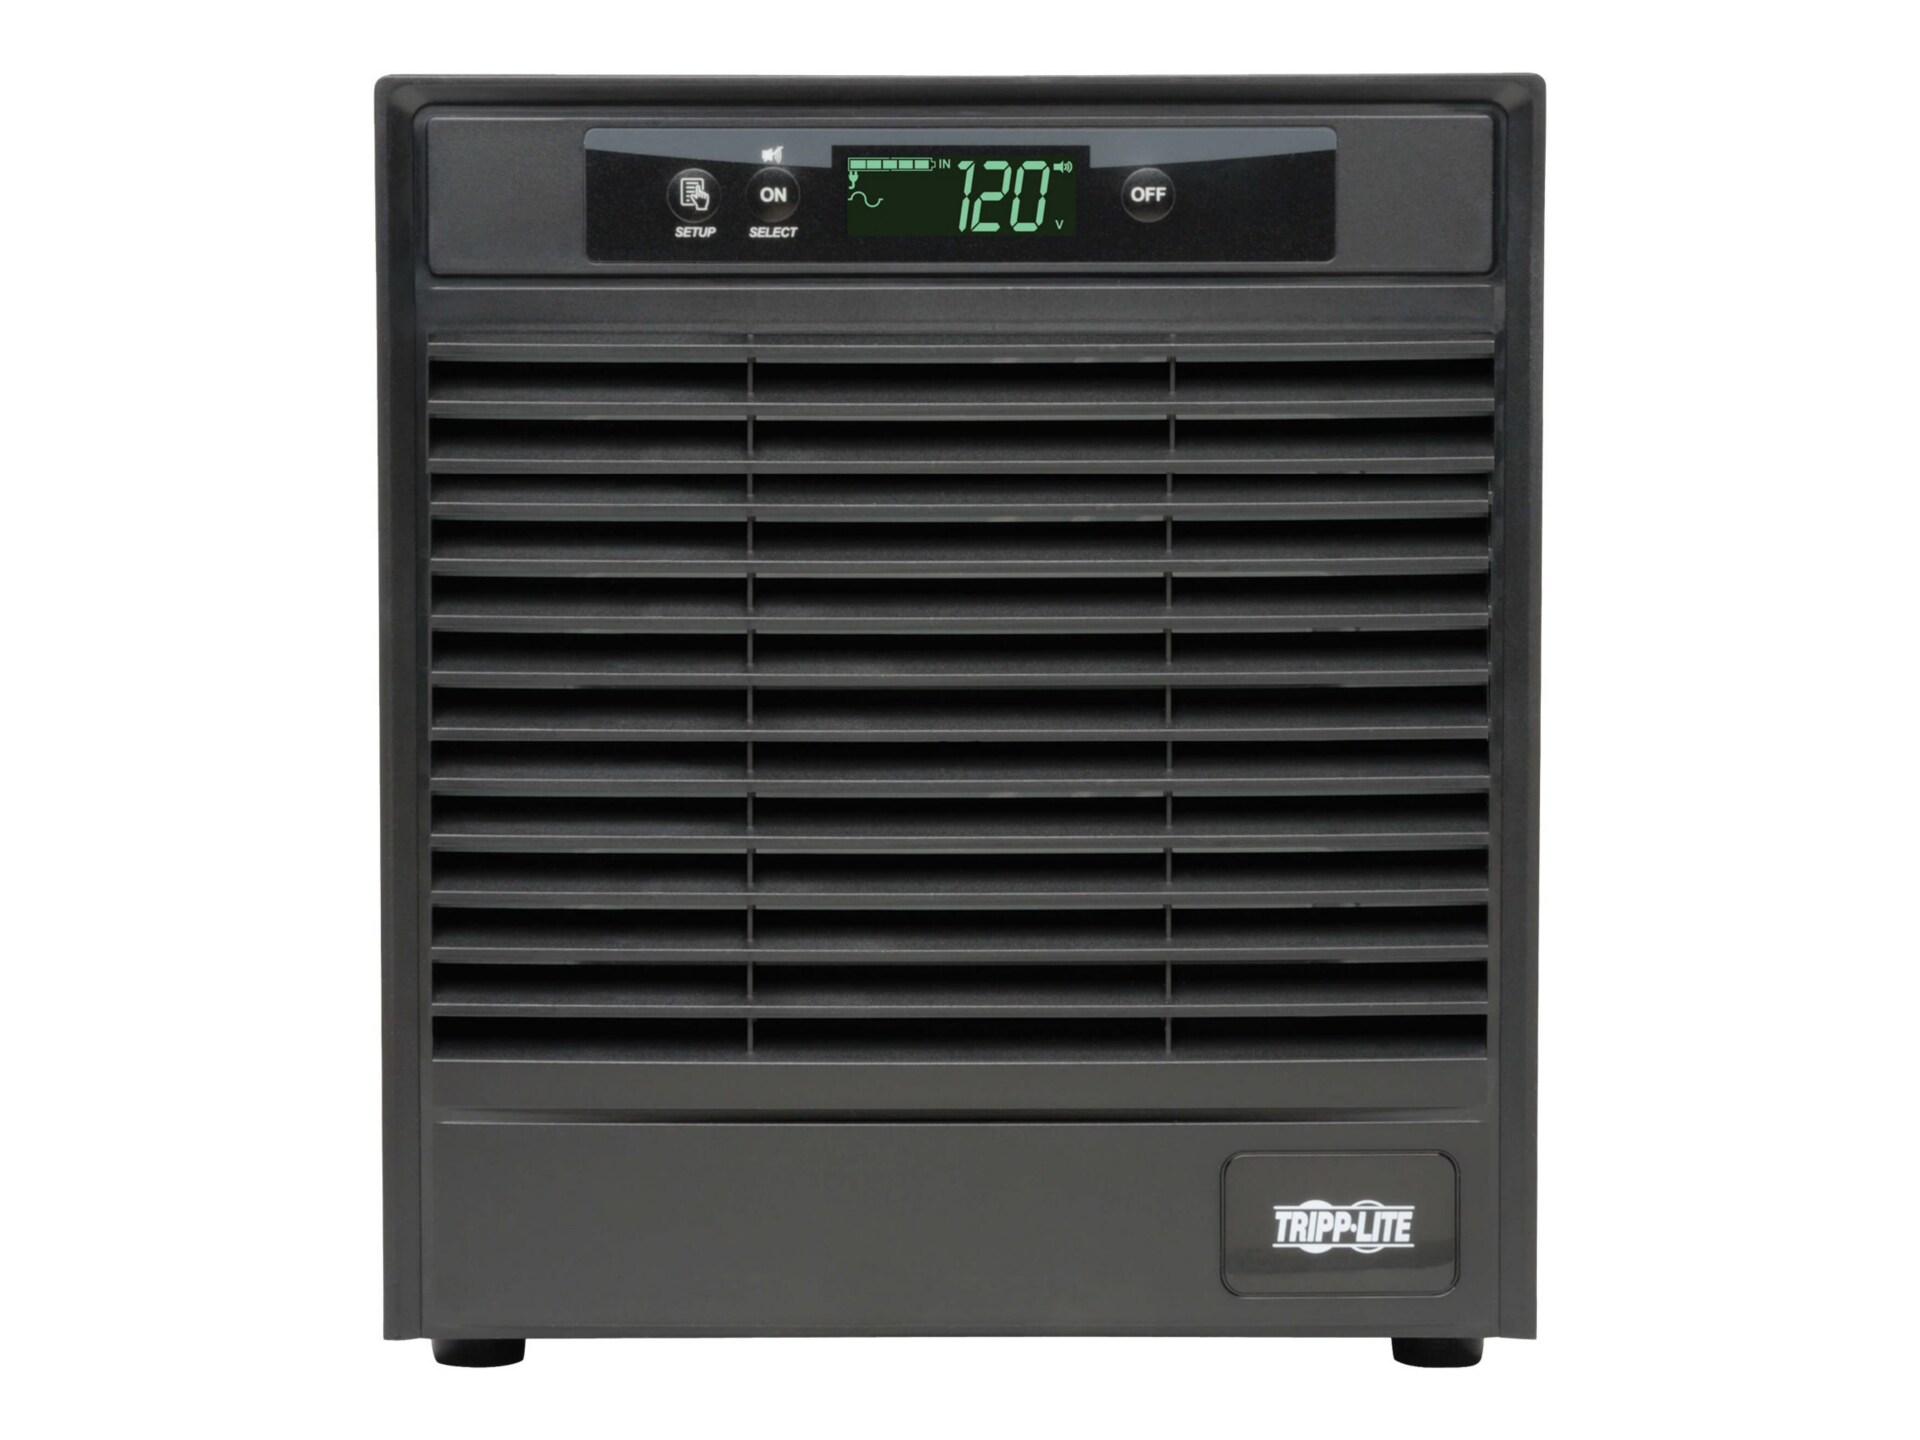 Eaton Tripp Lite Series SmartOnline 1960VA 1770W 120V Double-Conversion UPS - 7 Outlets, Extended Run, Network Card